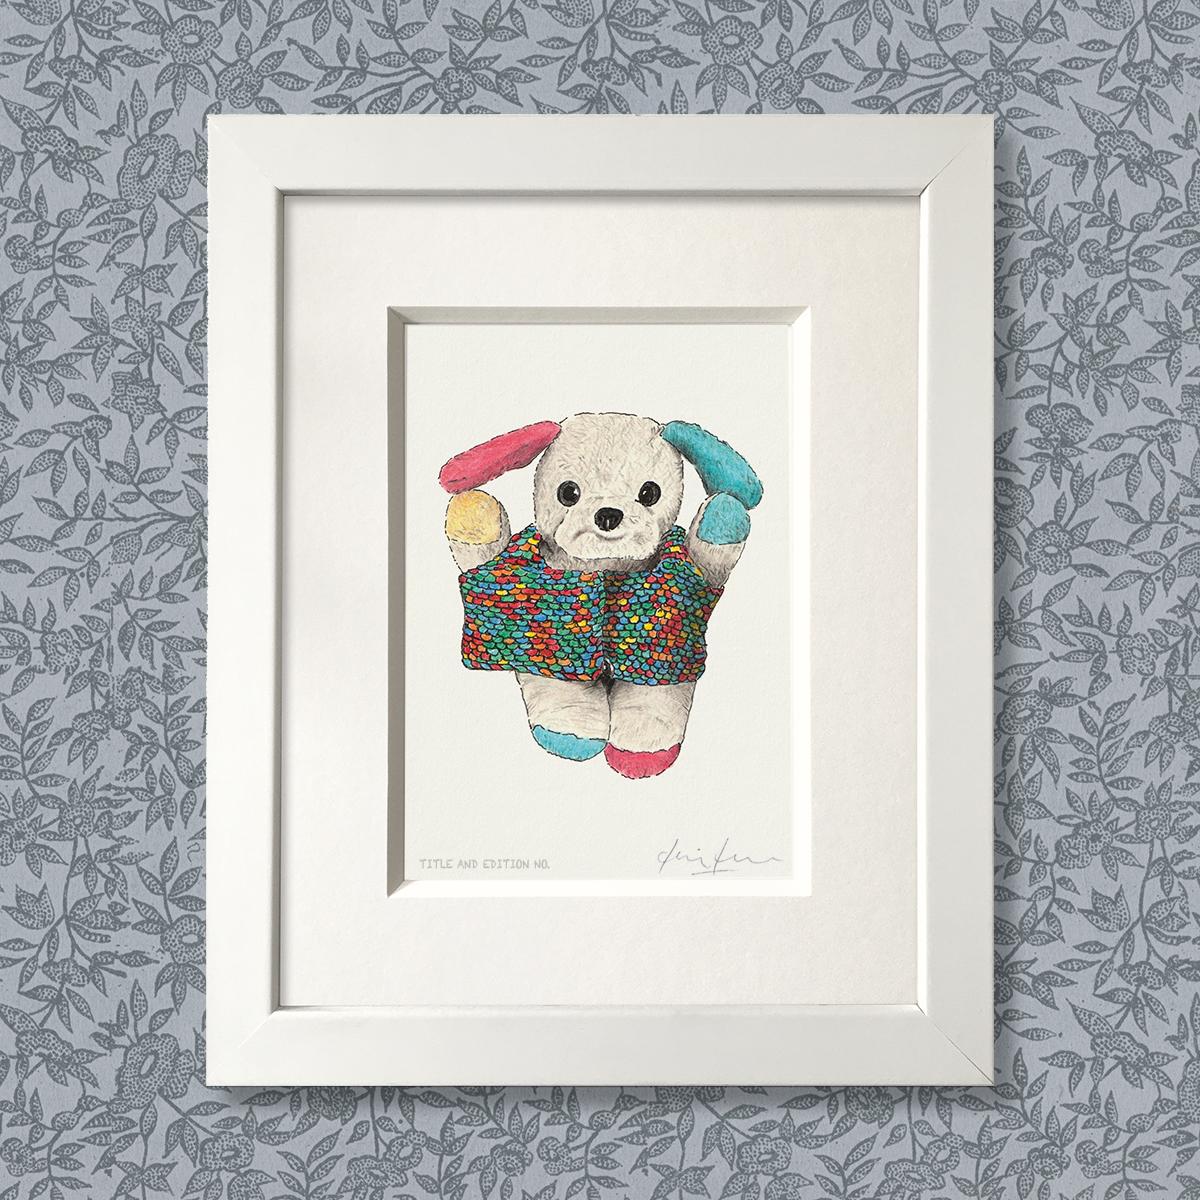 Limited edition print from a pen, ink and coloured pencil drawing of a soft toy in a knitted sweater in a white frame